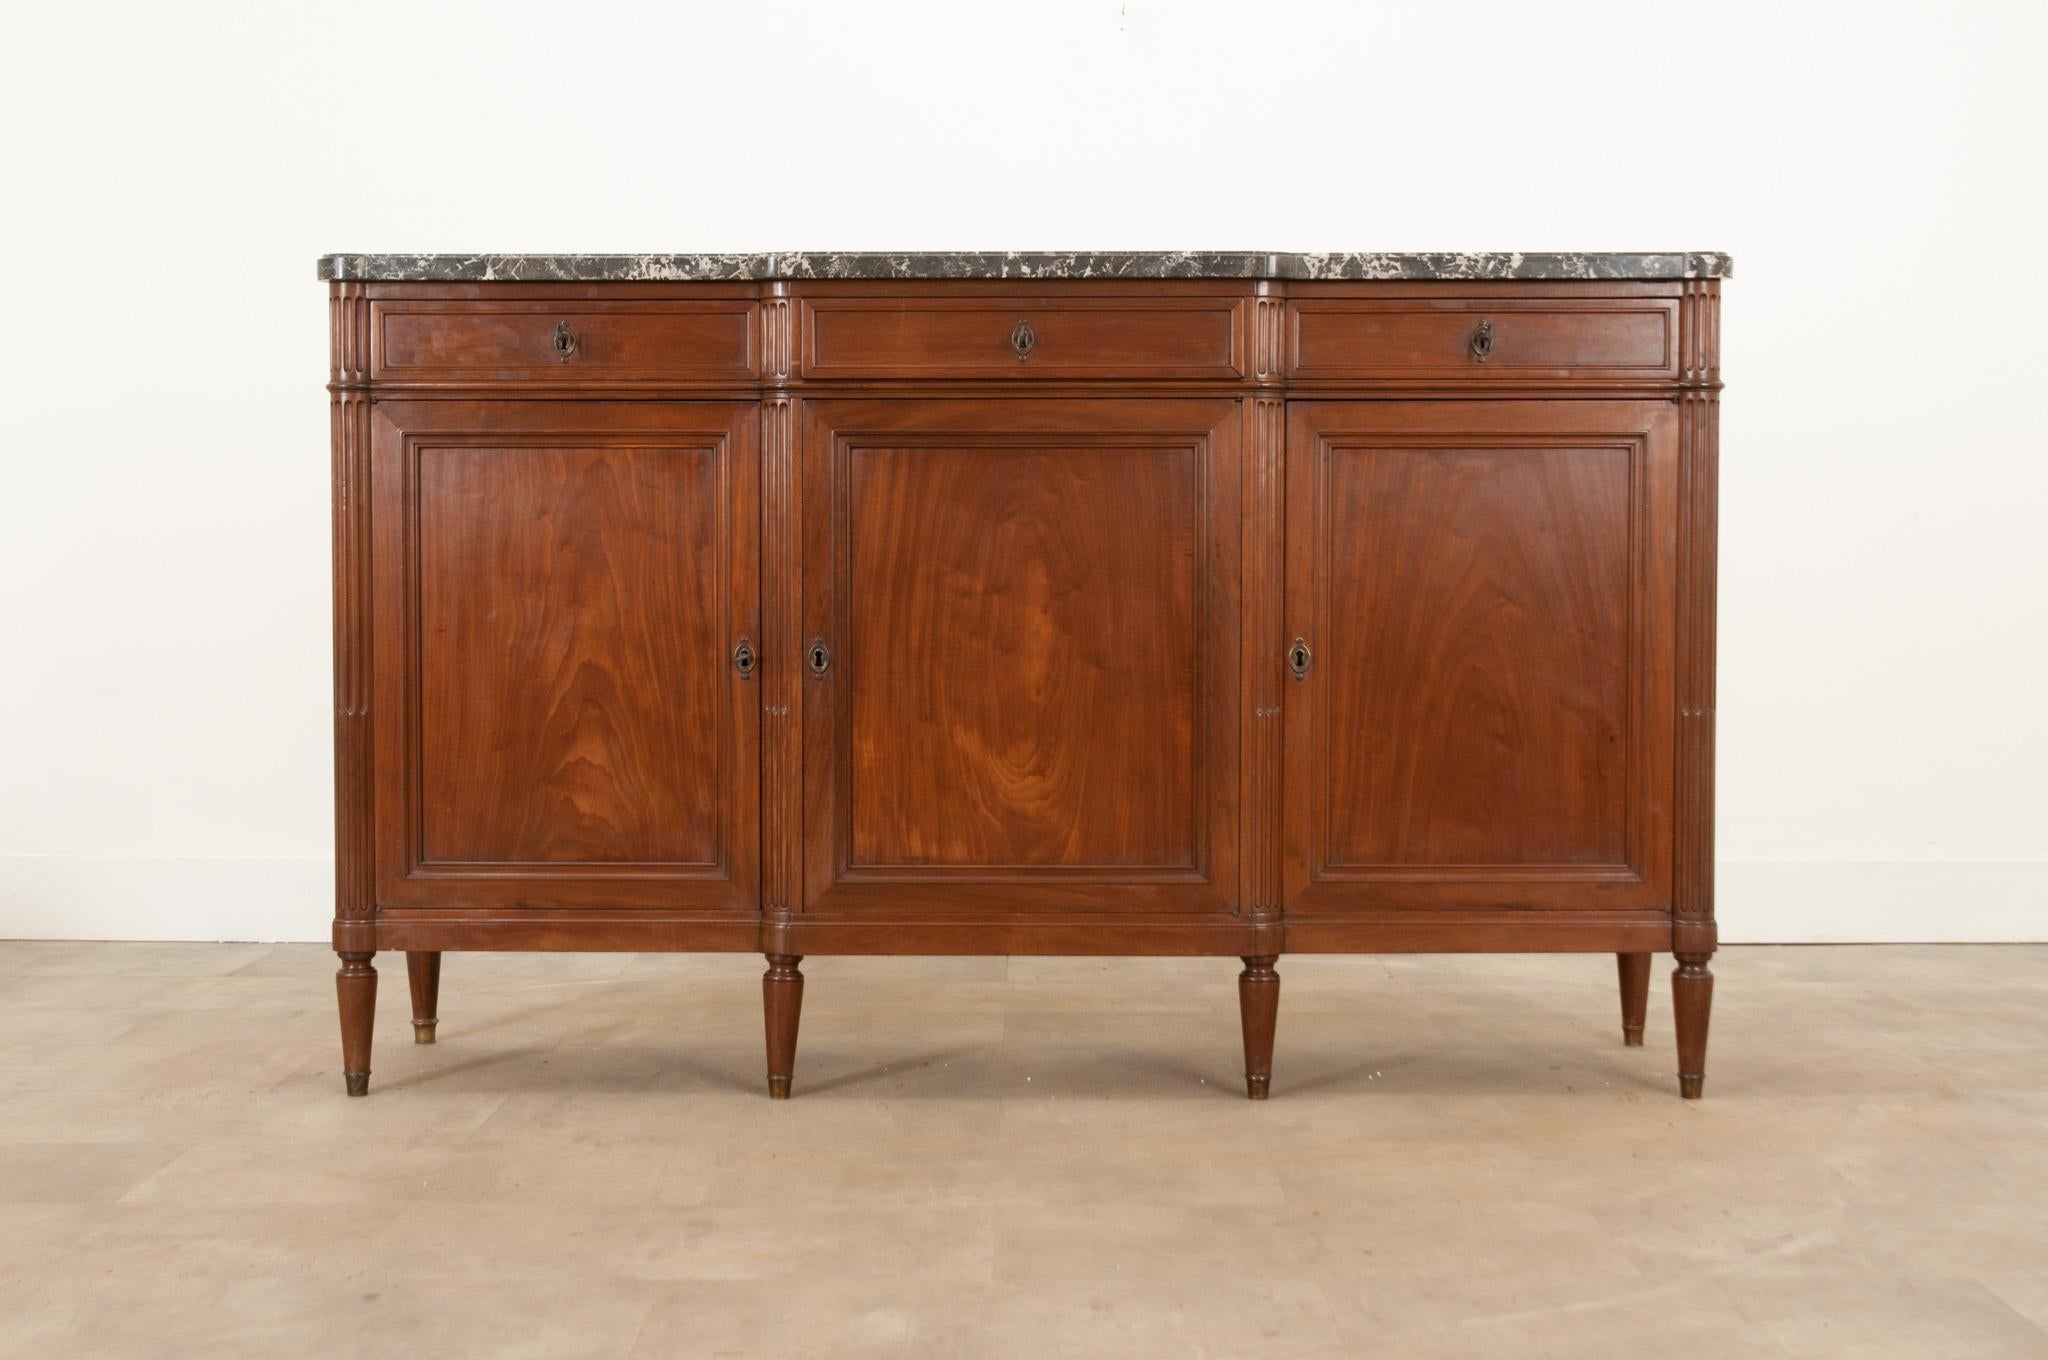 A handsome Louis XVI style enfilade from France, crafted in the 1880s. The original shaped marble top is in wonderful condition and is removable. Three easy-to-use drawers with simple paneling and cast brass escutcheons, three keys serve as the